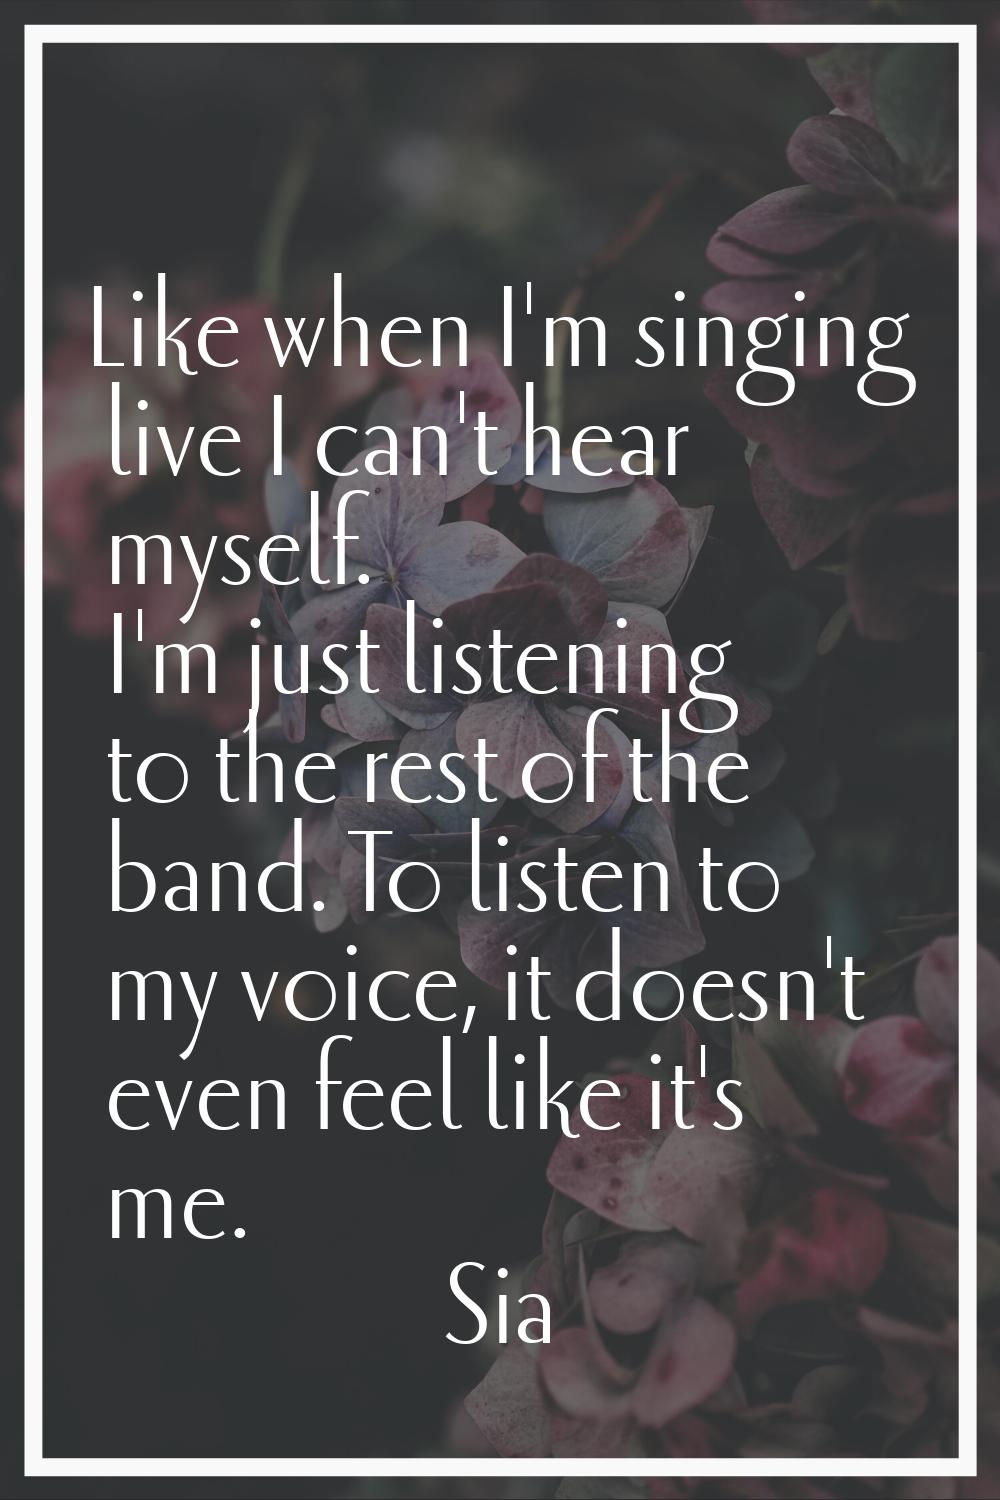 Like when I'm singing live I can't hear myself. I'm just listening to the rest of the band. To list